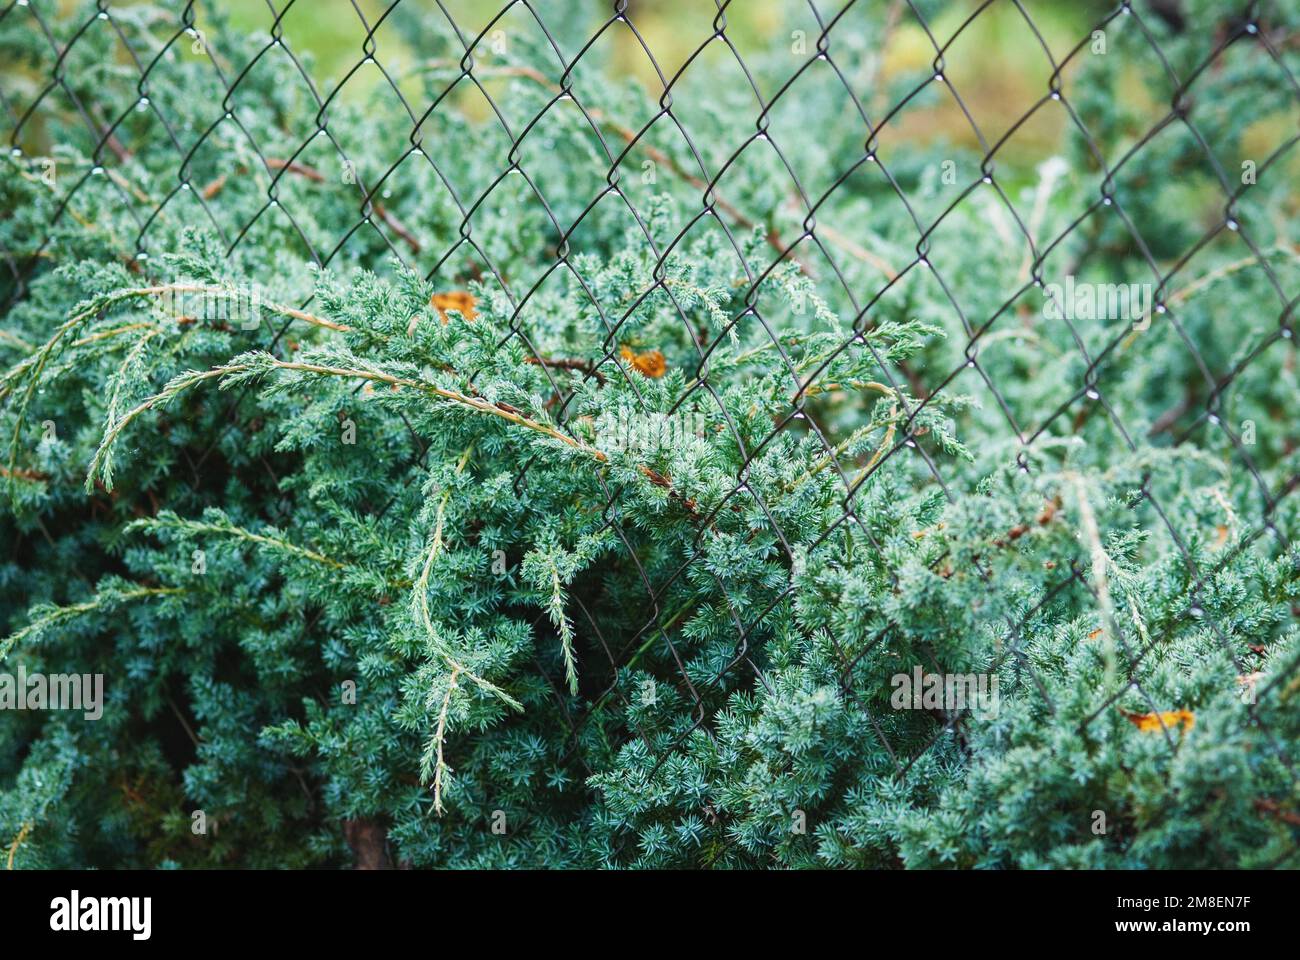 Juniperus squamata blue swede growing by net fence Stock Photo